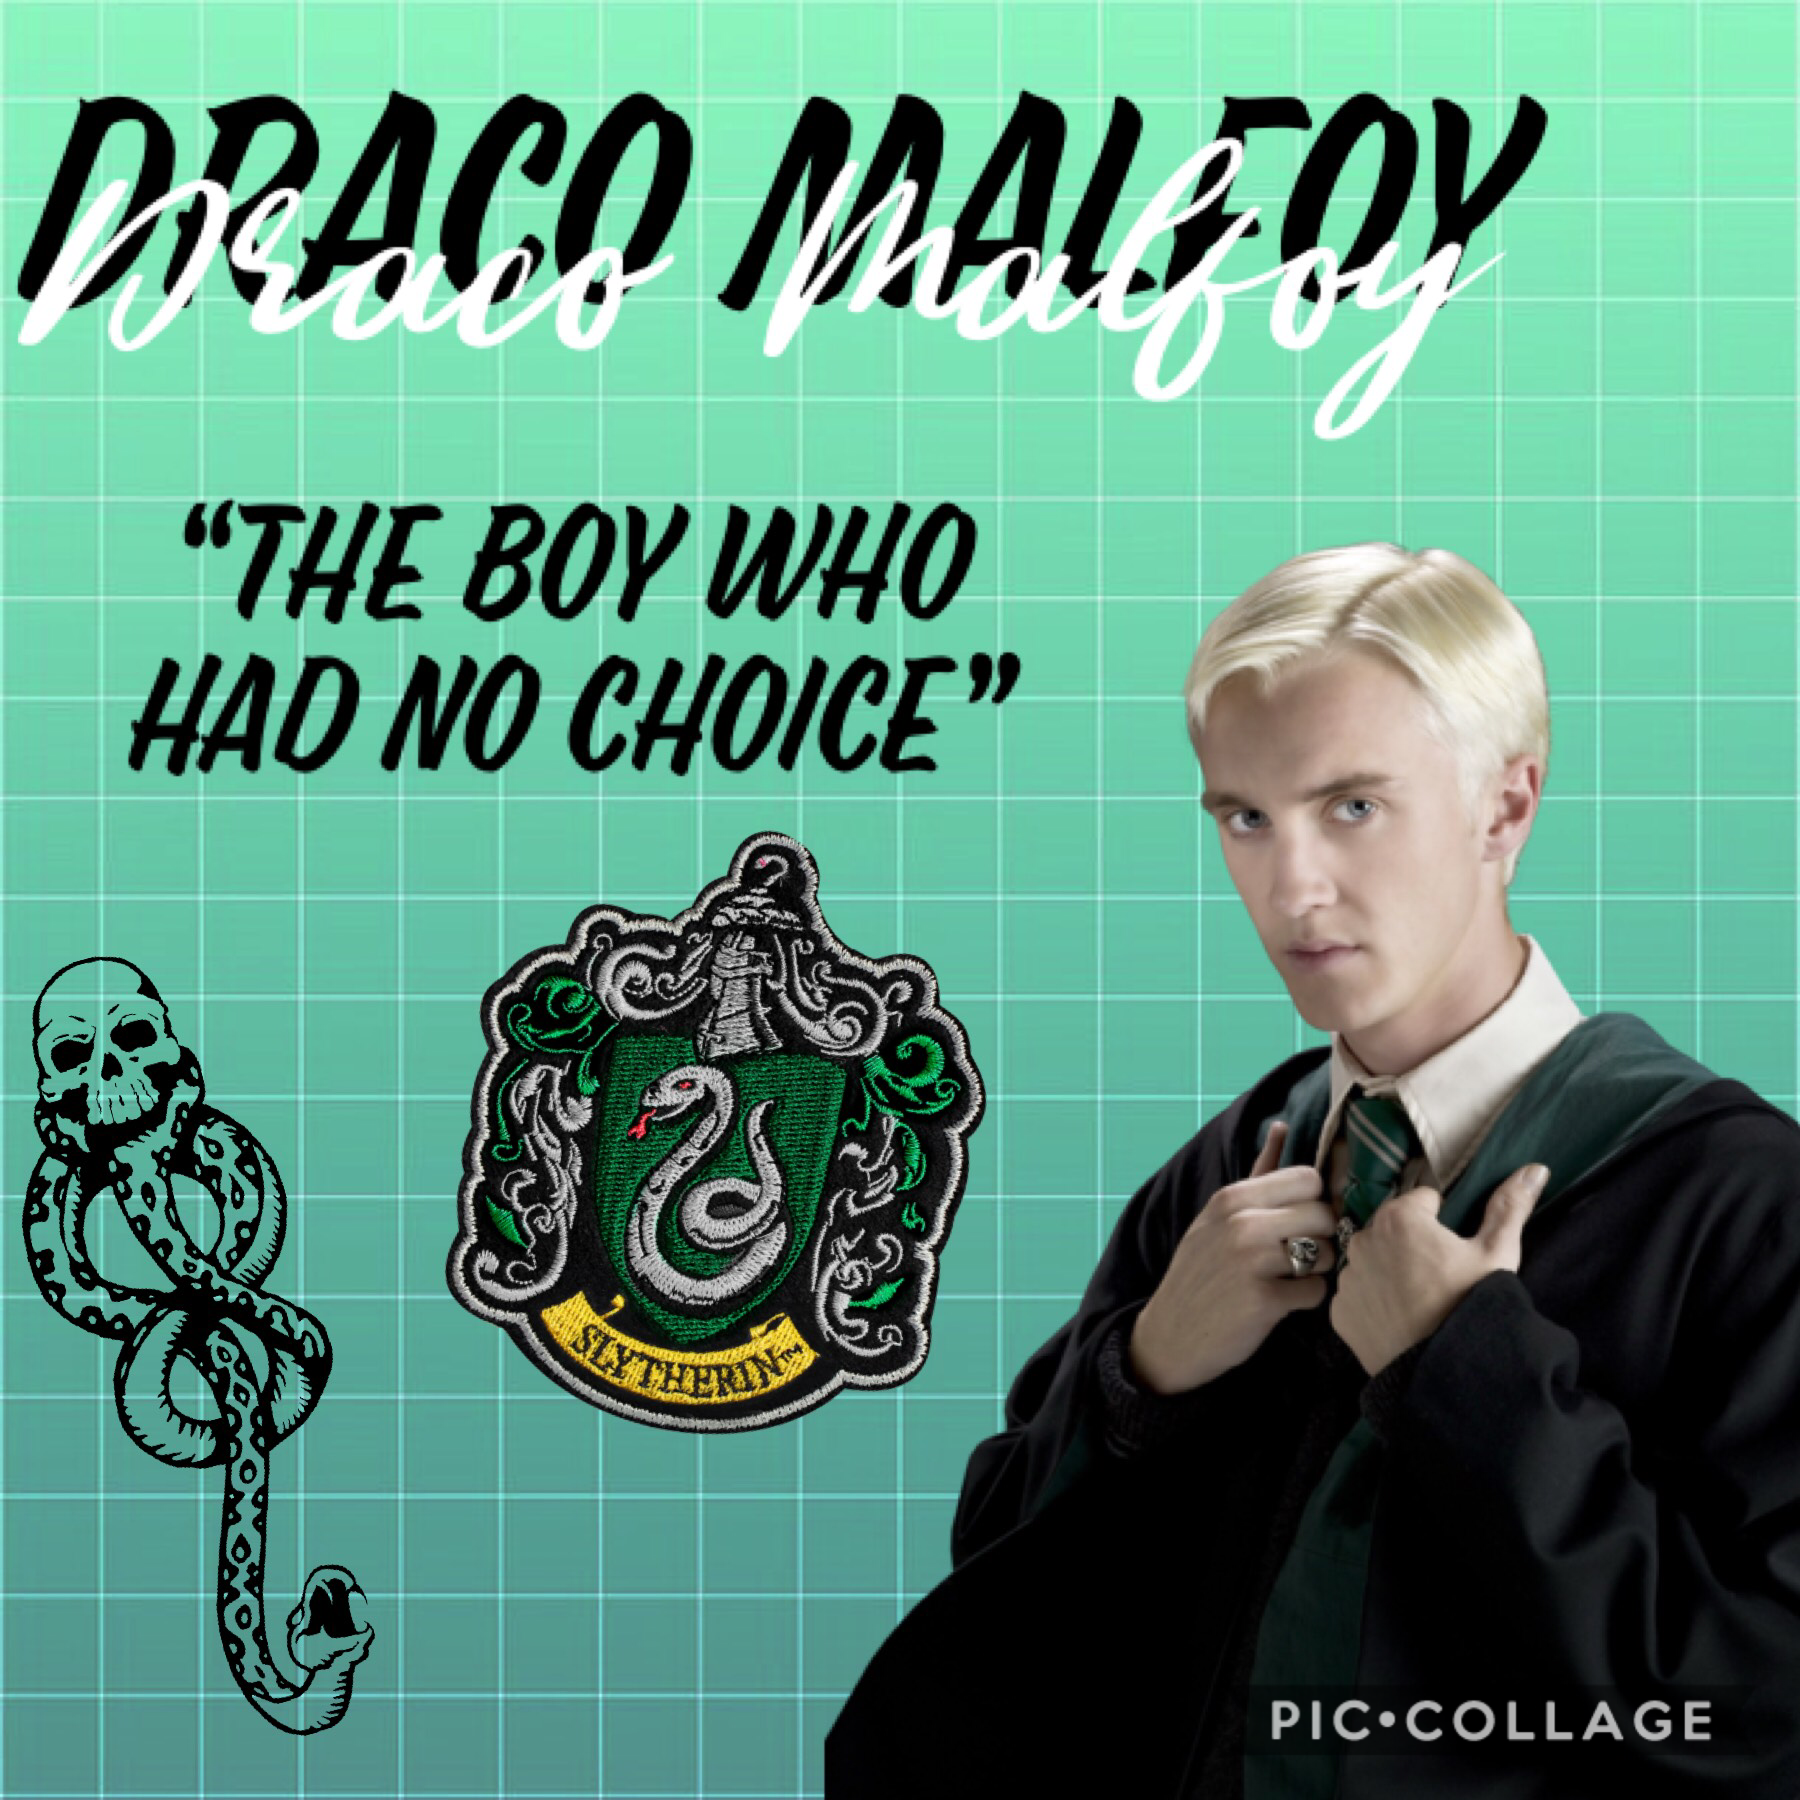 🦄TAP🦄

I hope you like it!

Should I make more Harry Potter collages like this?

What else would you like to see on my account?